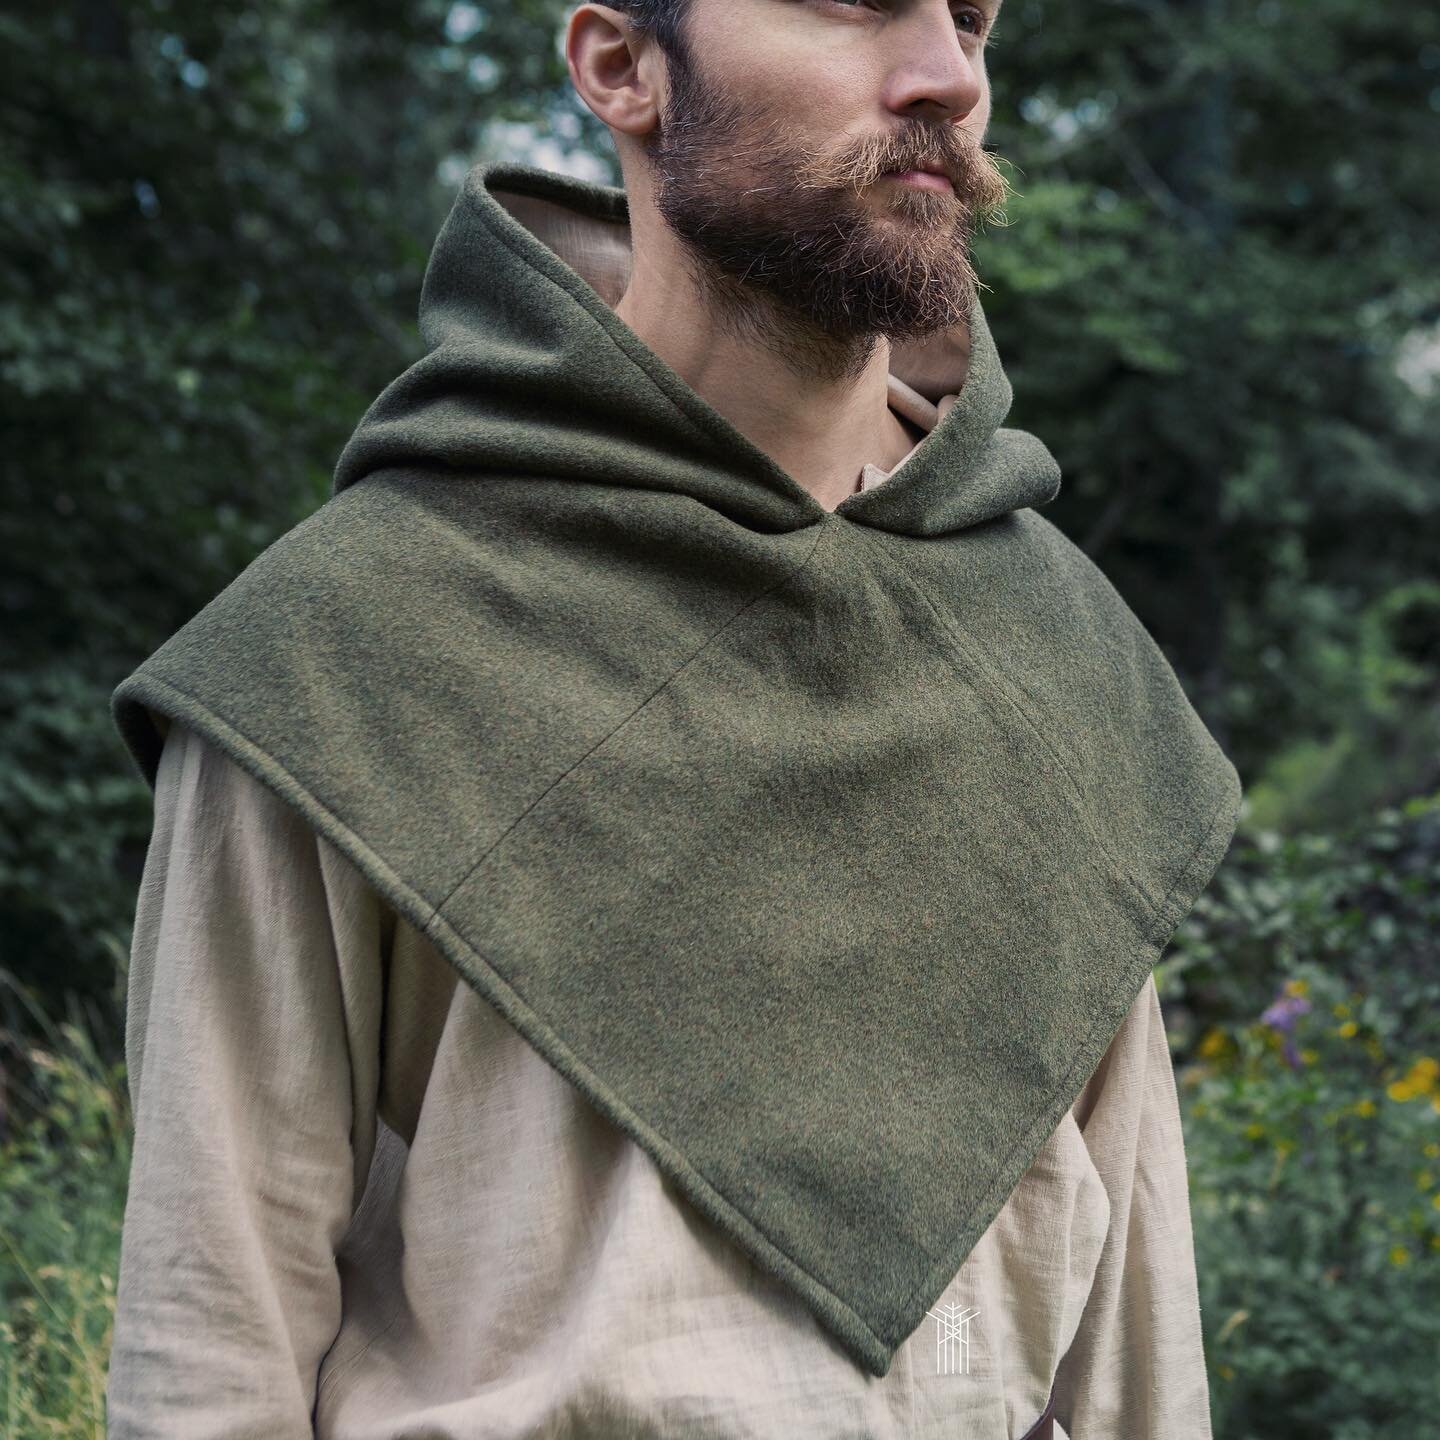 Skjoldehamn hood

The original Skjoldehamn hood dates between late 10th to early 11th century And&oslash;ya (Norway) and had a simple construction of three or four squares of wool. Very practical and unisex, this woolen hood is the perfect element to